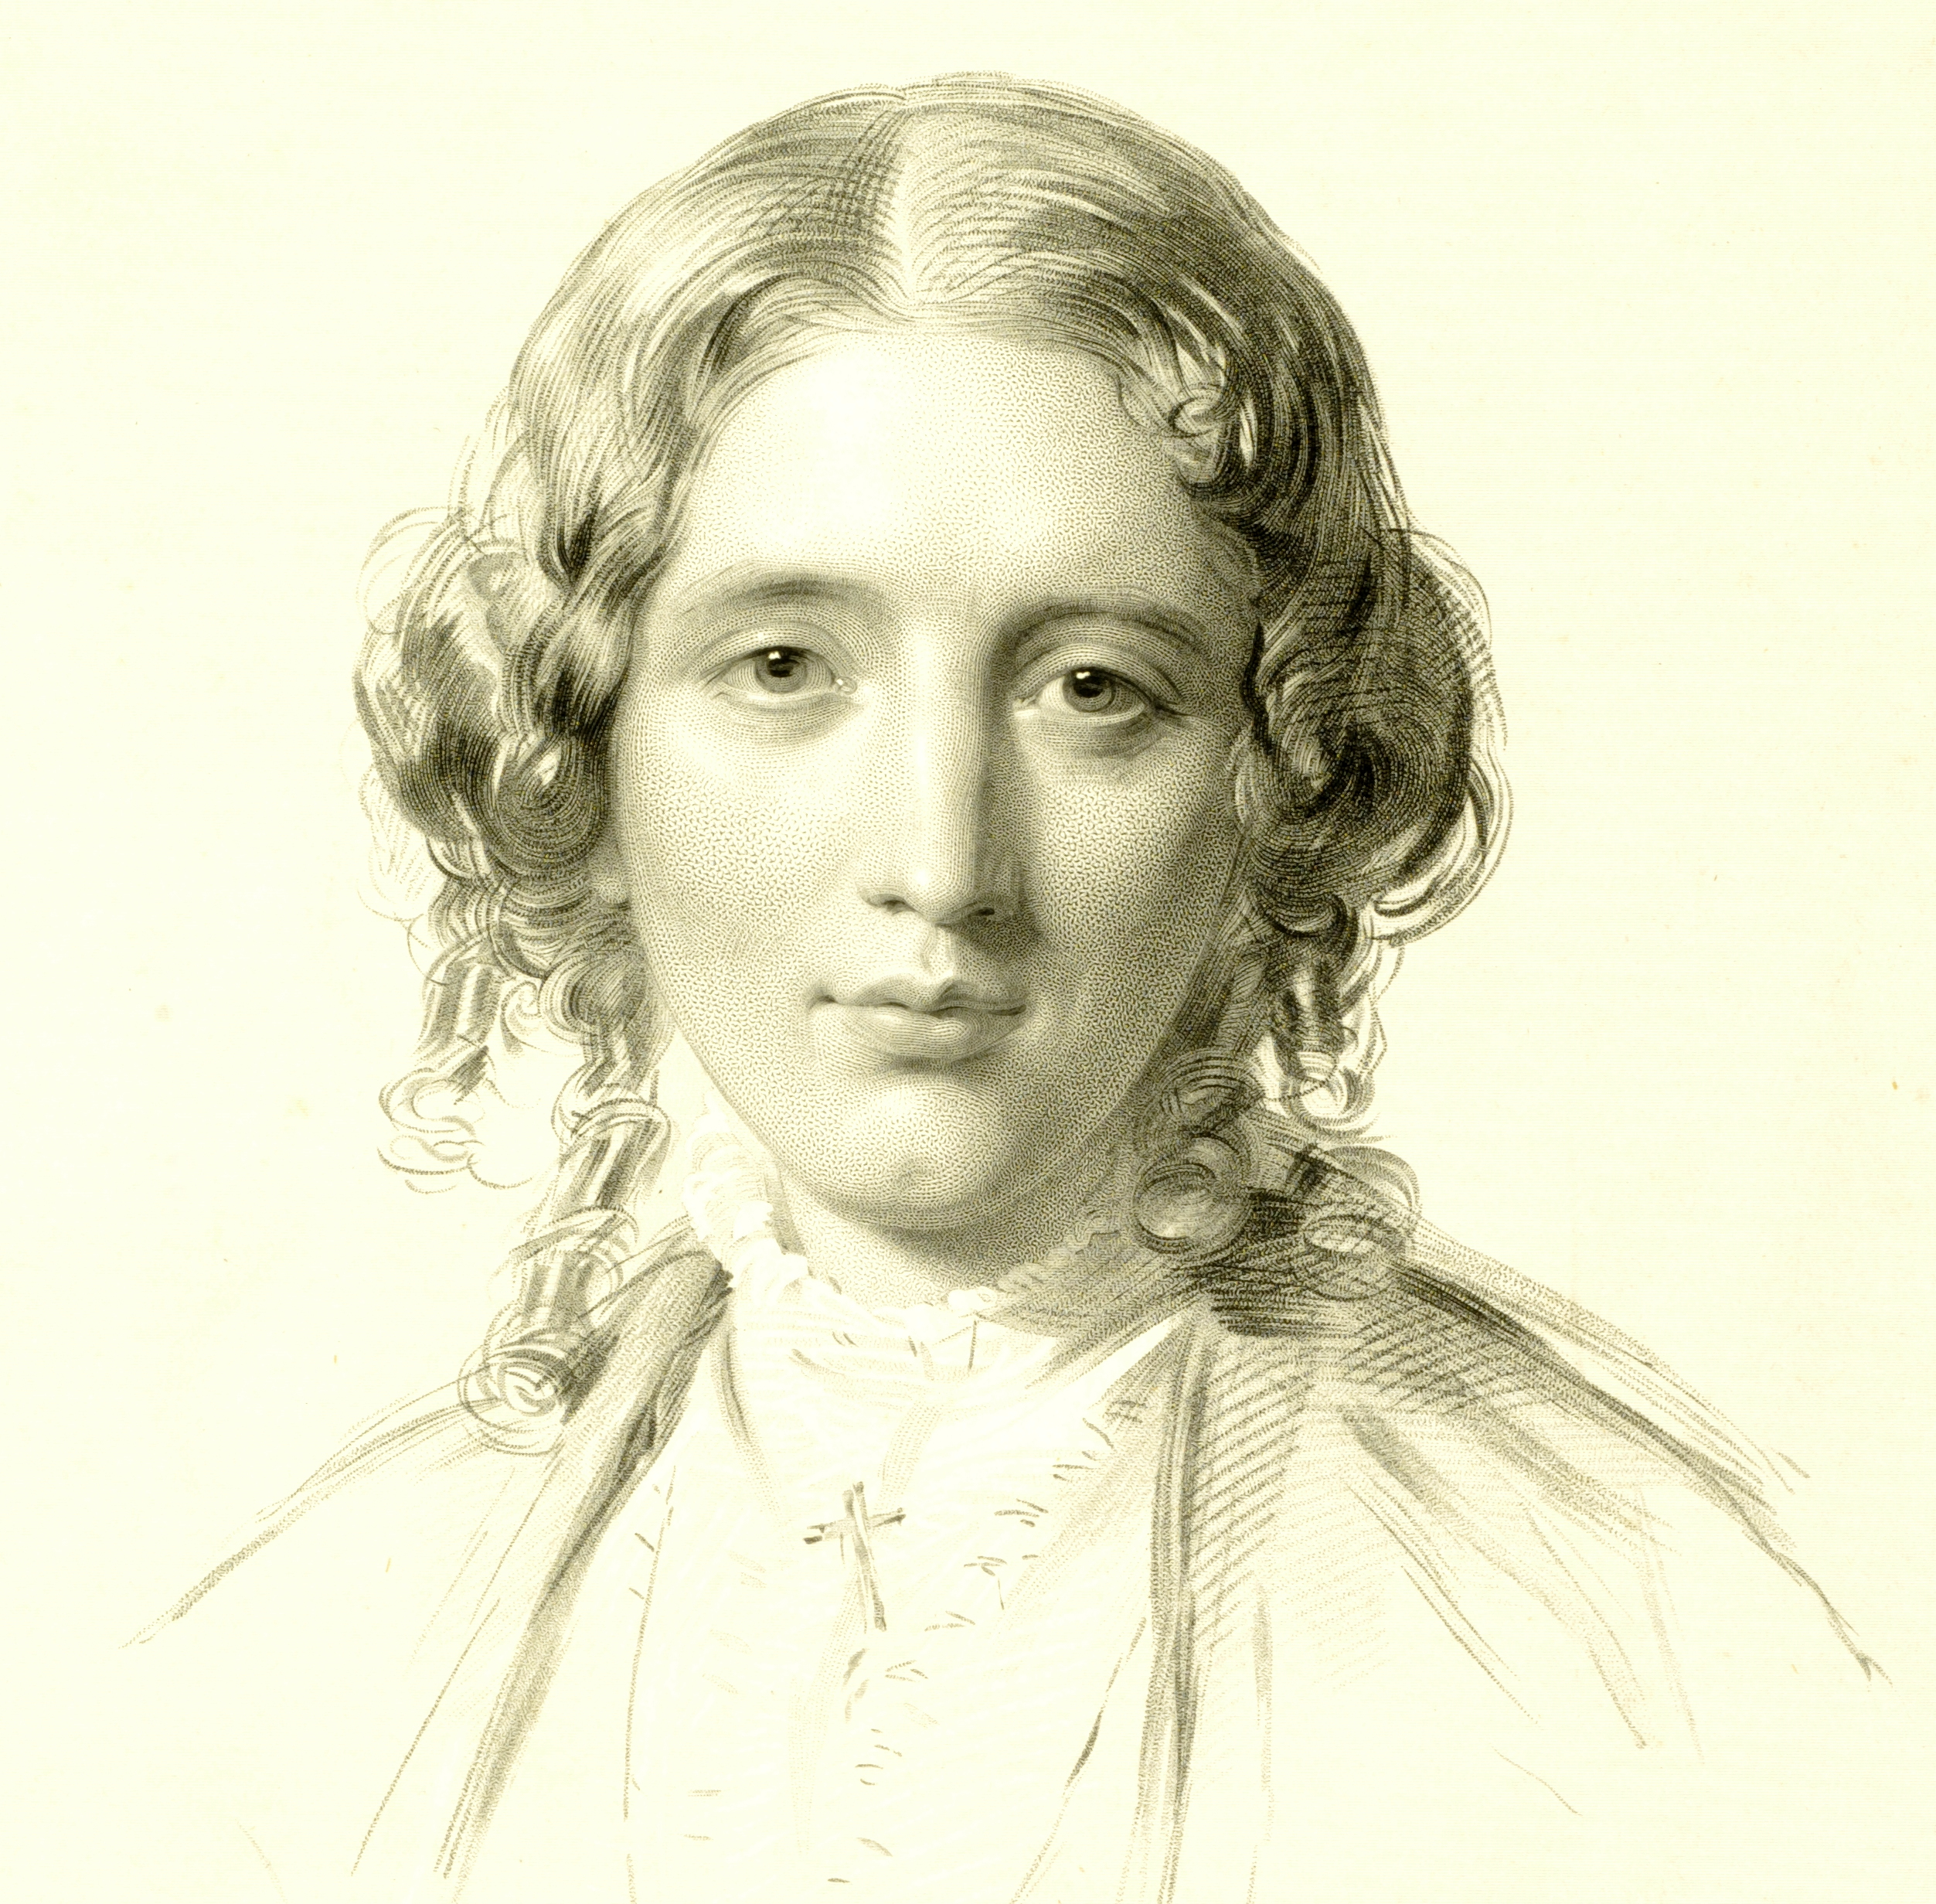 Harriet Beecher Stowe, posed here for an author's portrait, wrote a book read 'round the world.